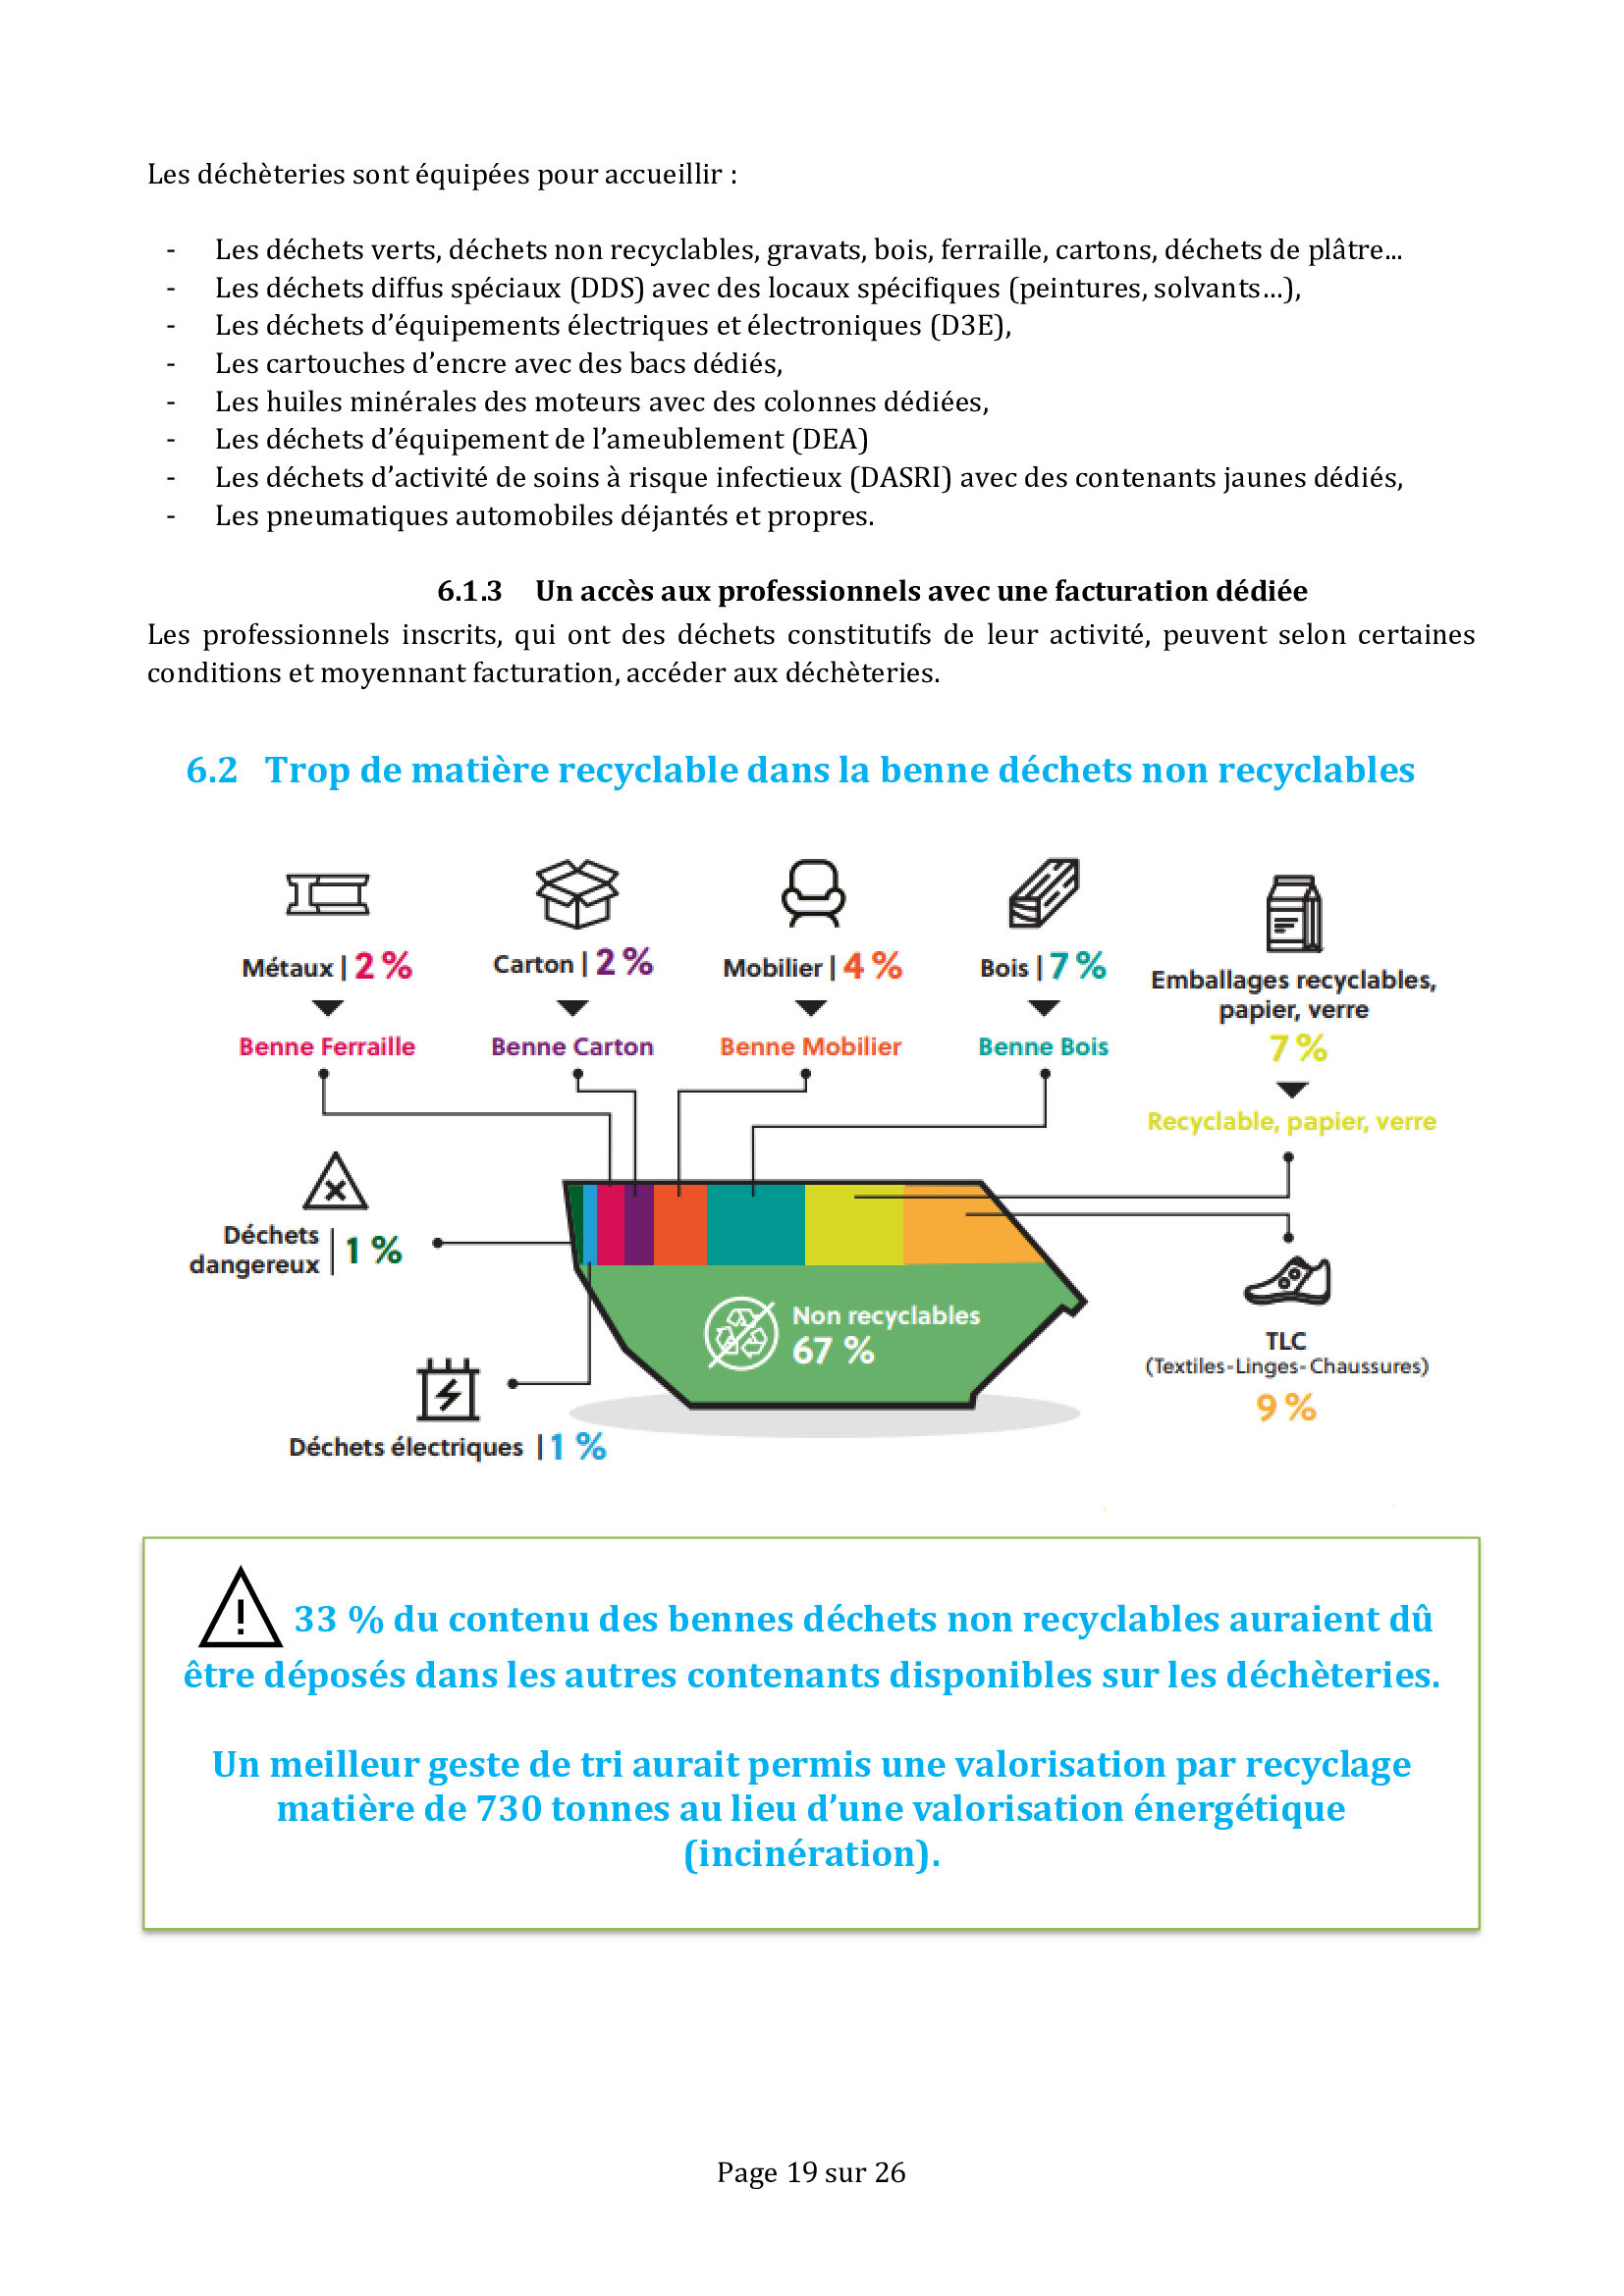 2021 - Rapport annuel - page 19.jpg